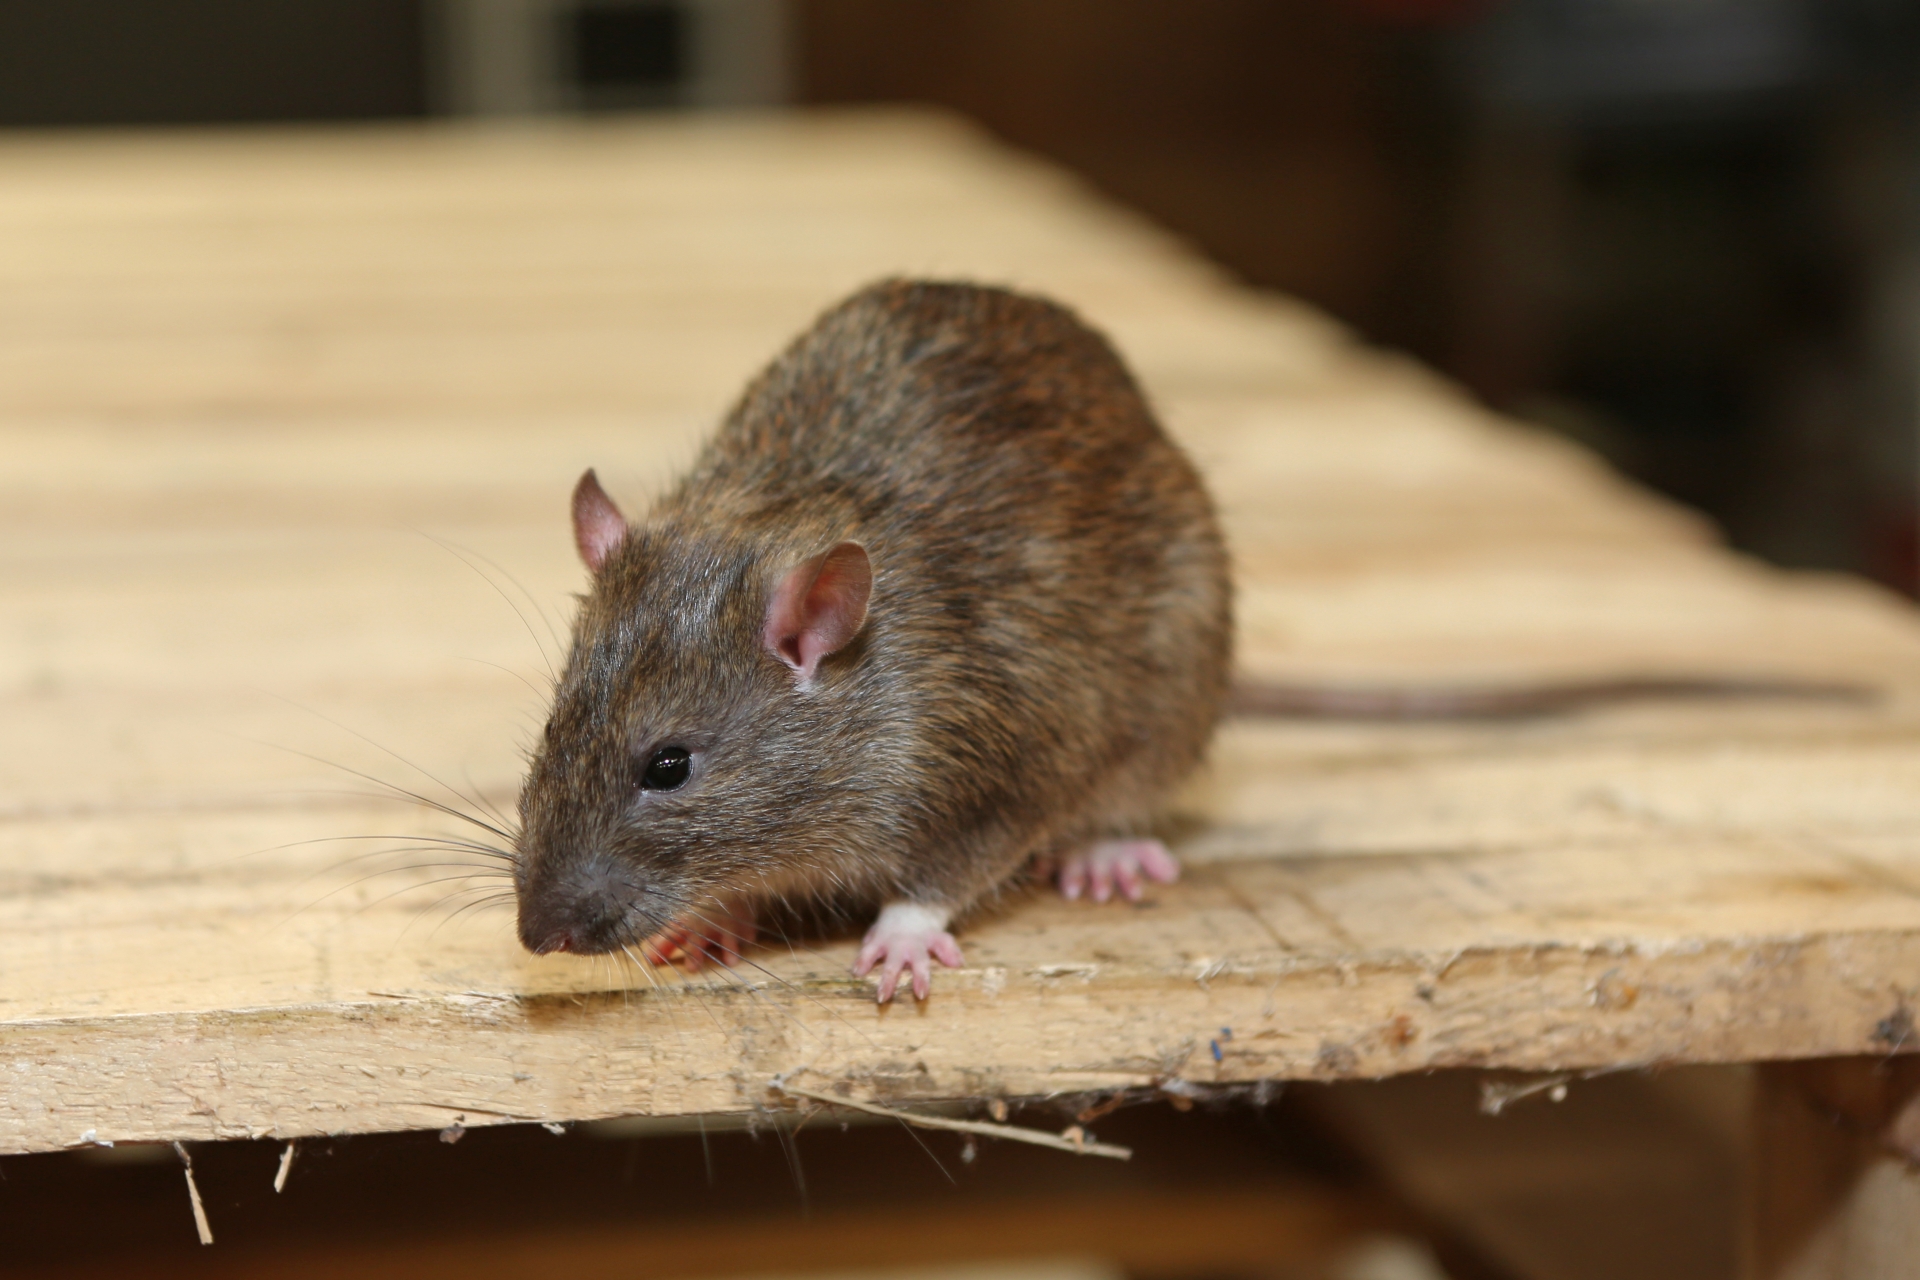 Rat Infestation, Pest Control in Maida Vale, Warwick Avenue, W9. Call Now 020 8166 9746